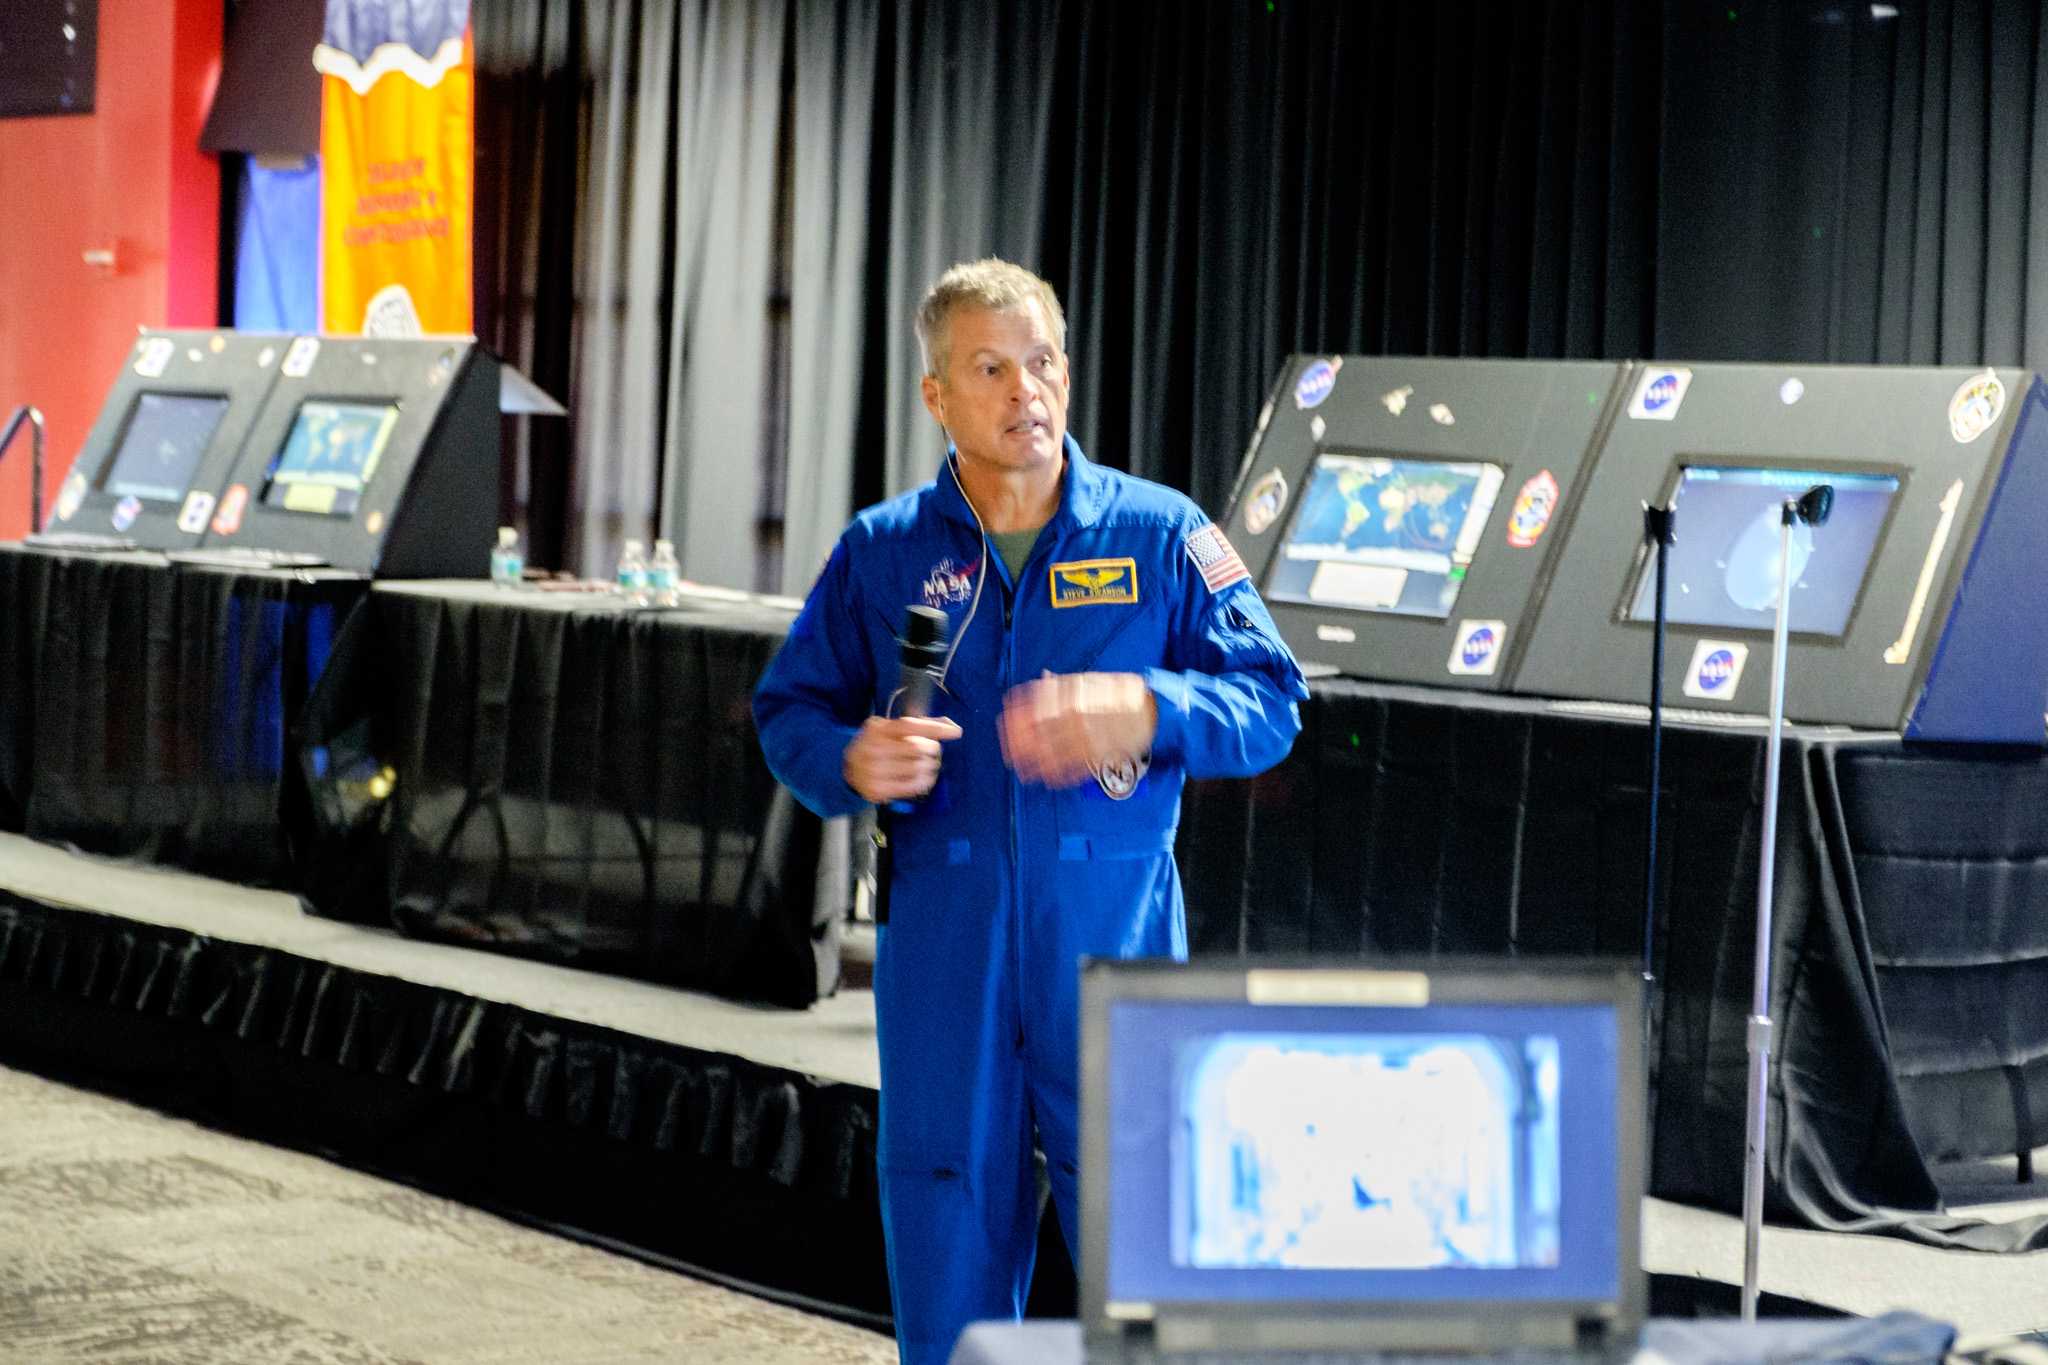 Astronaut Steven R. Swanson talks about what he did on the International Space Station. He is the first person to take a selfie on the ISS. Mohammed F Emran | Asst. Creative Director